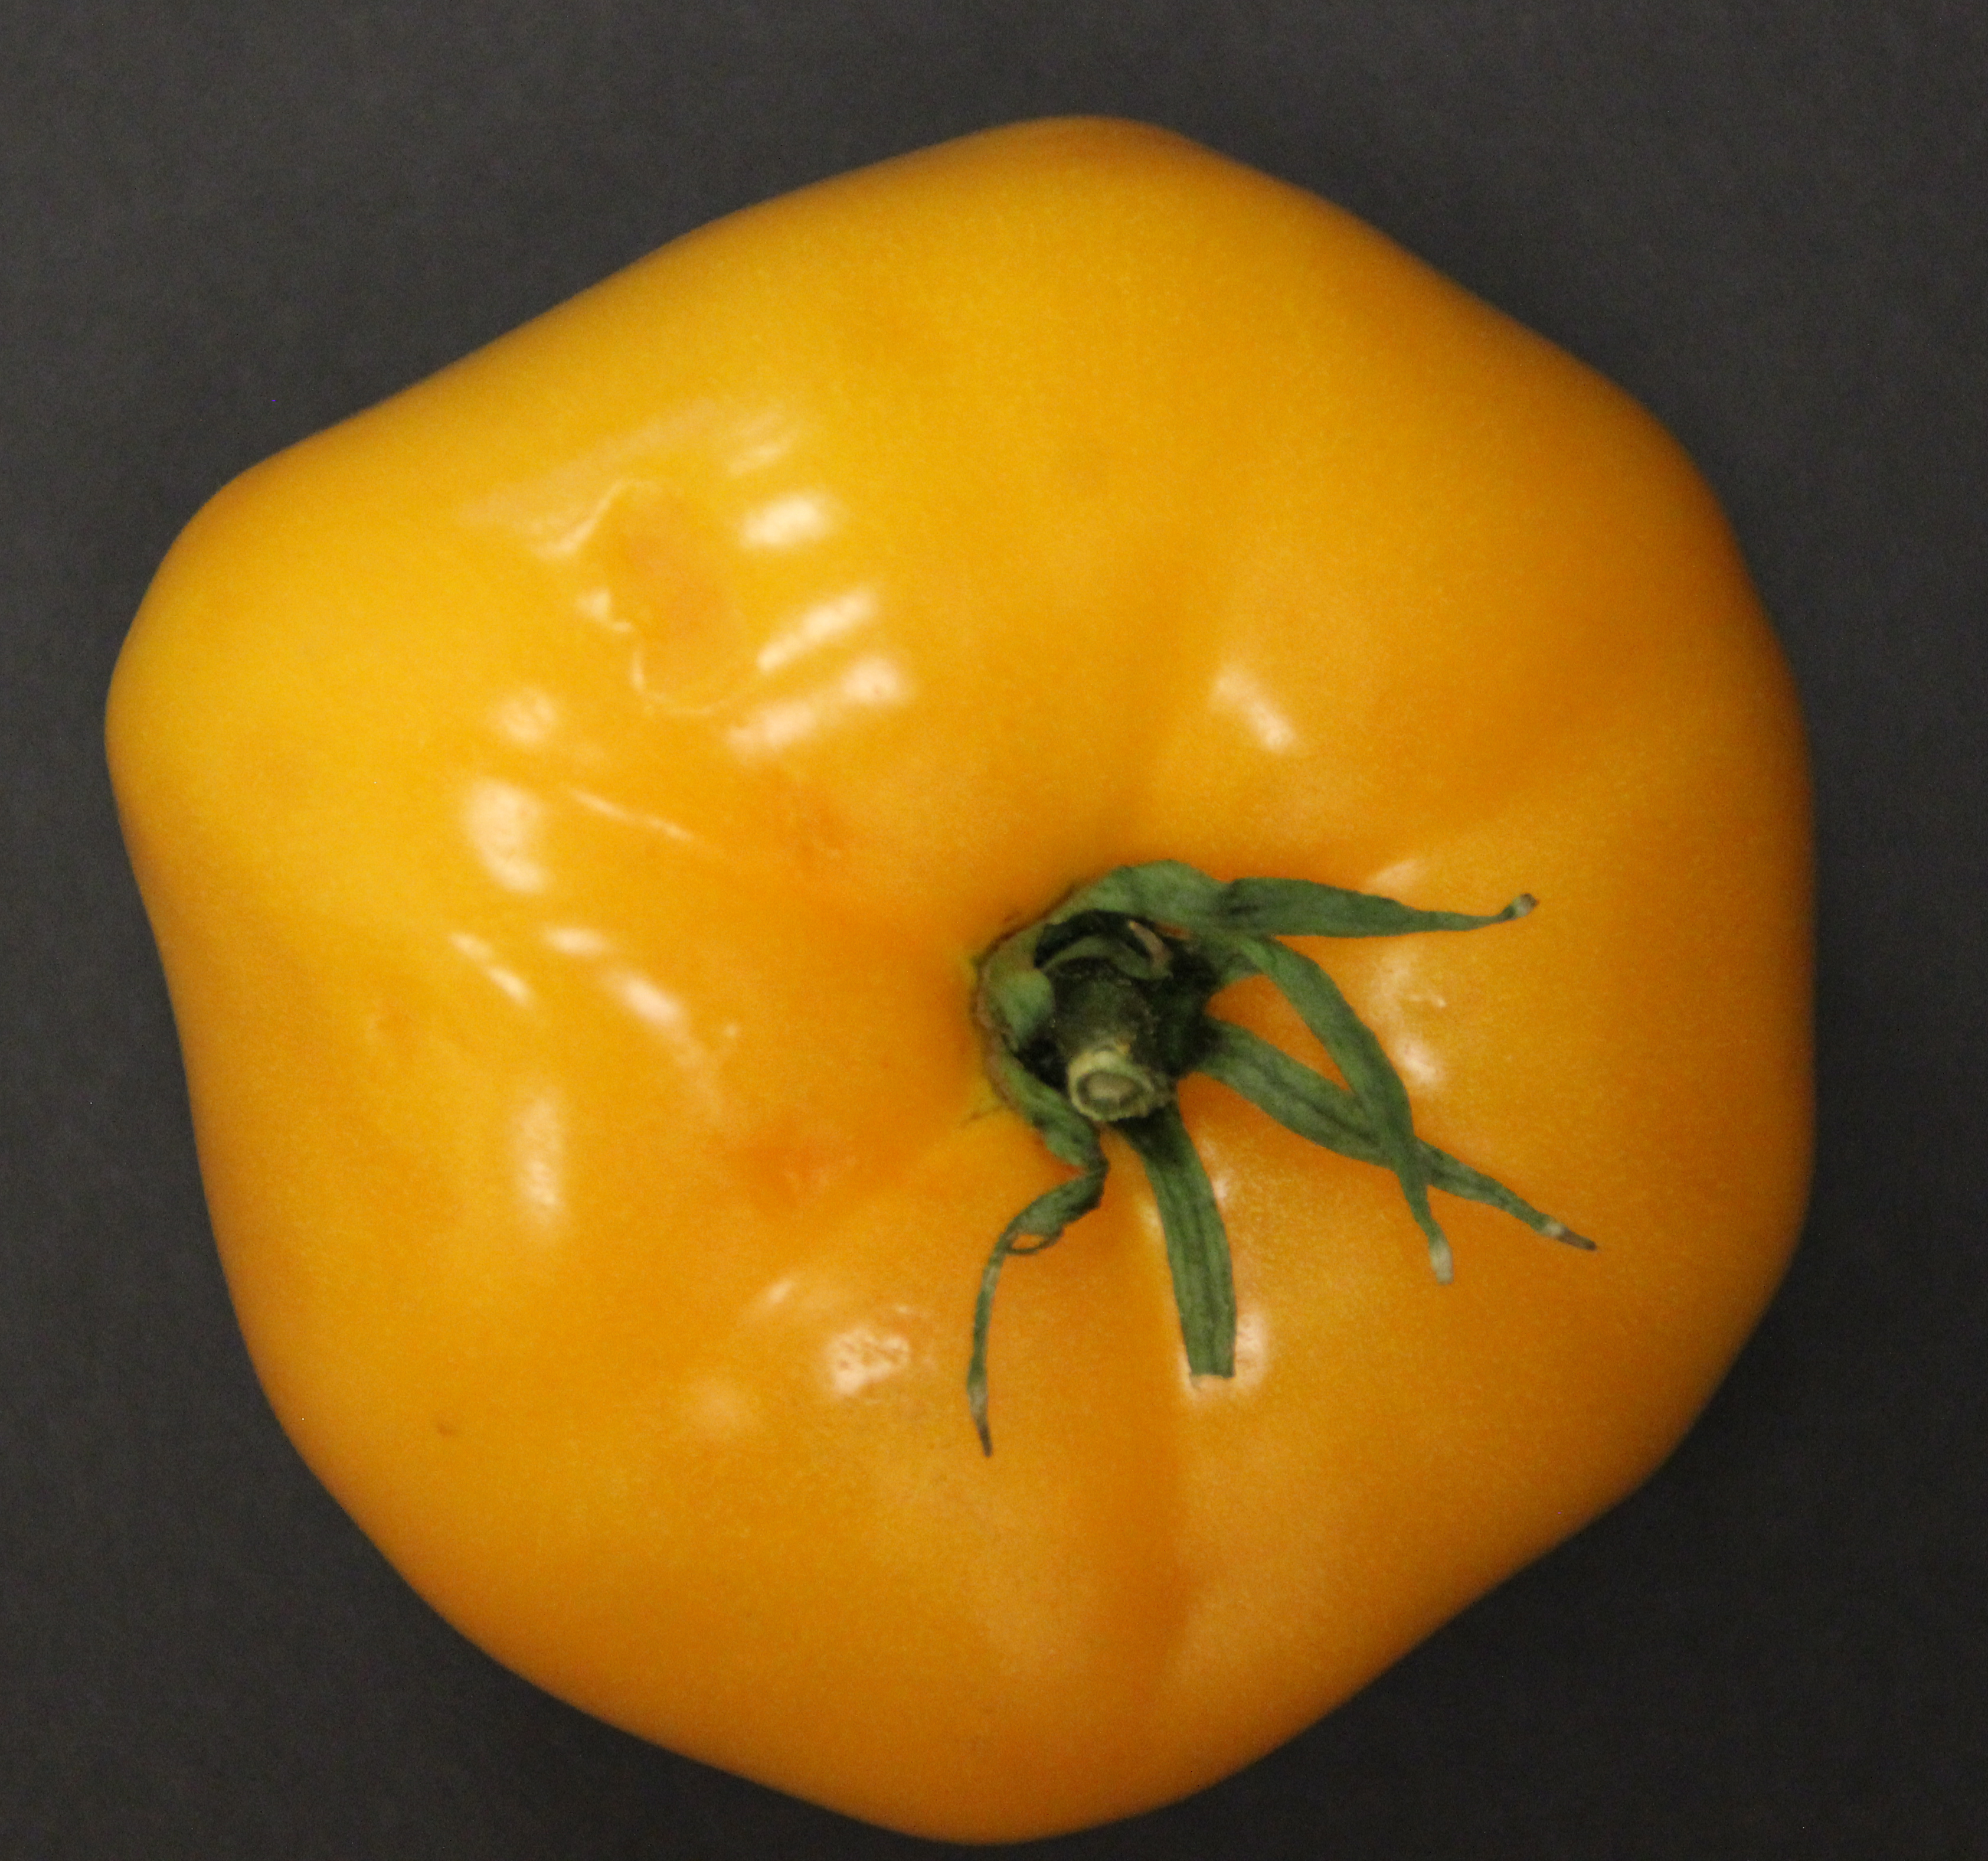 Puffiness of tomato fruit external symptoms.